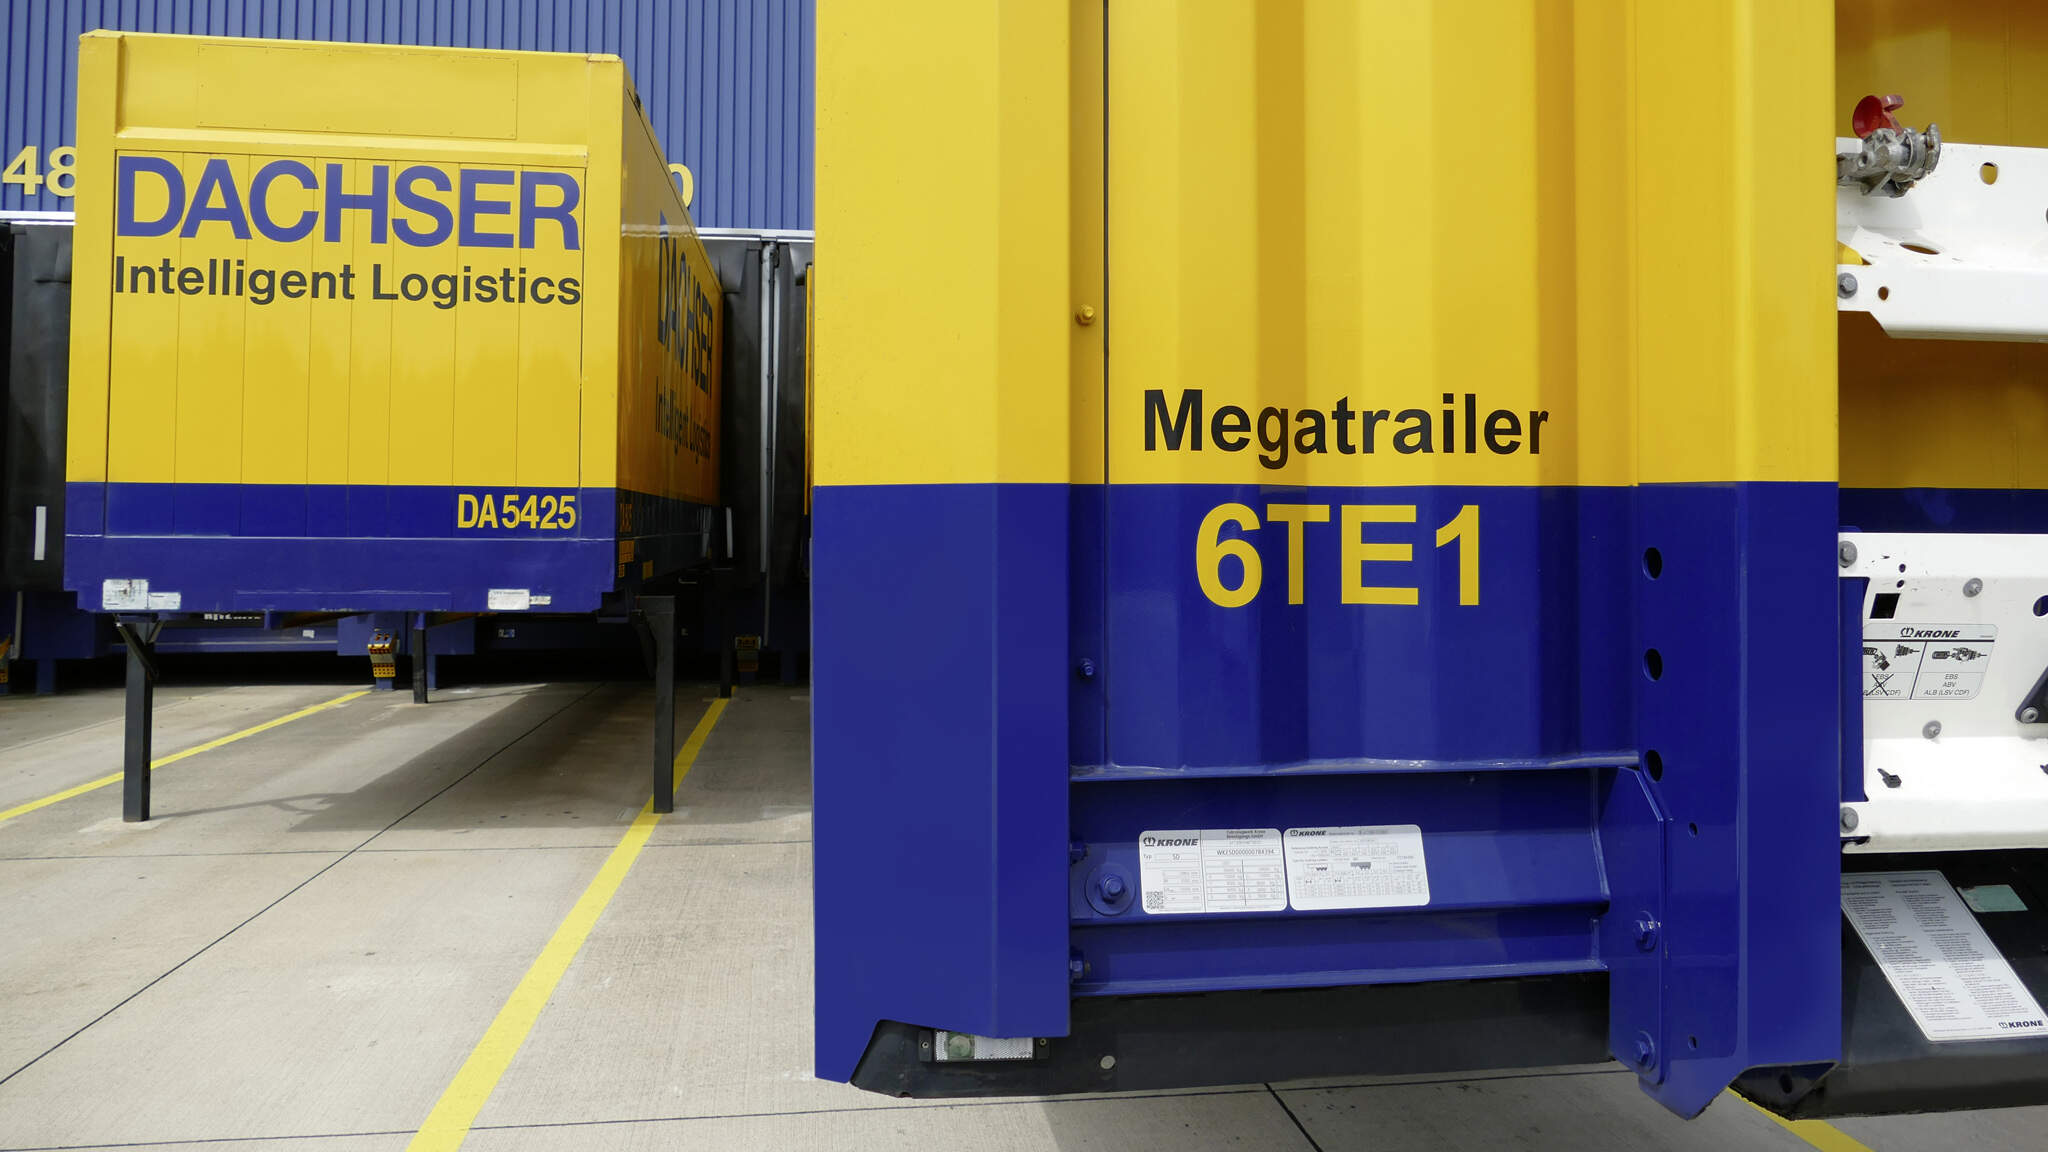 Successive conversion of semitrailers in the European Logistics business line optimizes capacity utilization and at the same time improves the climate footprint of transports.